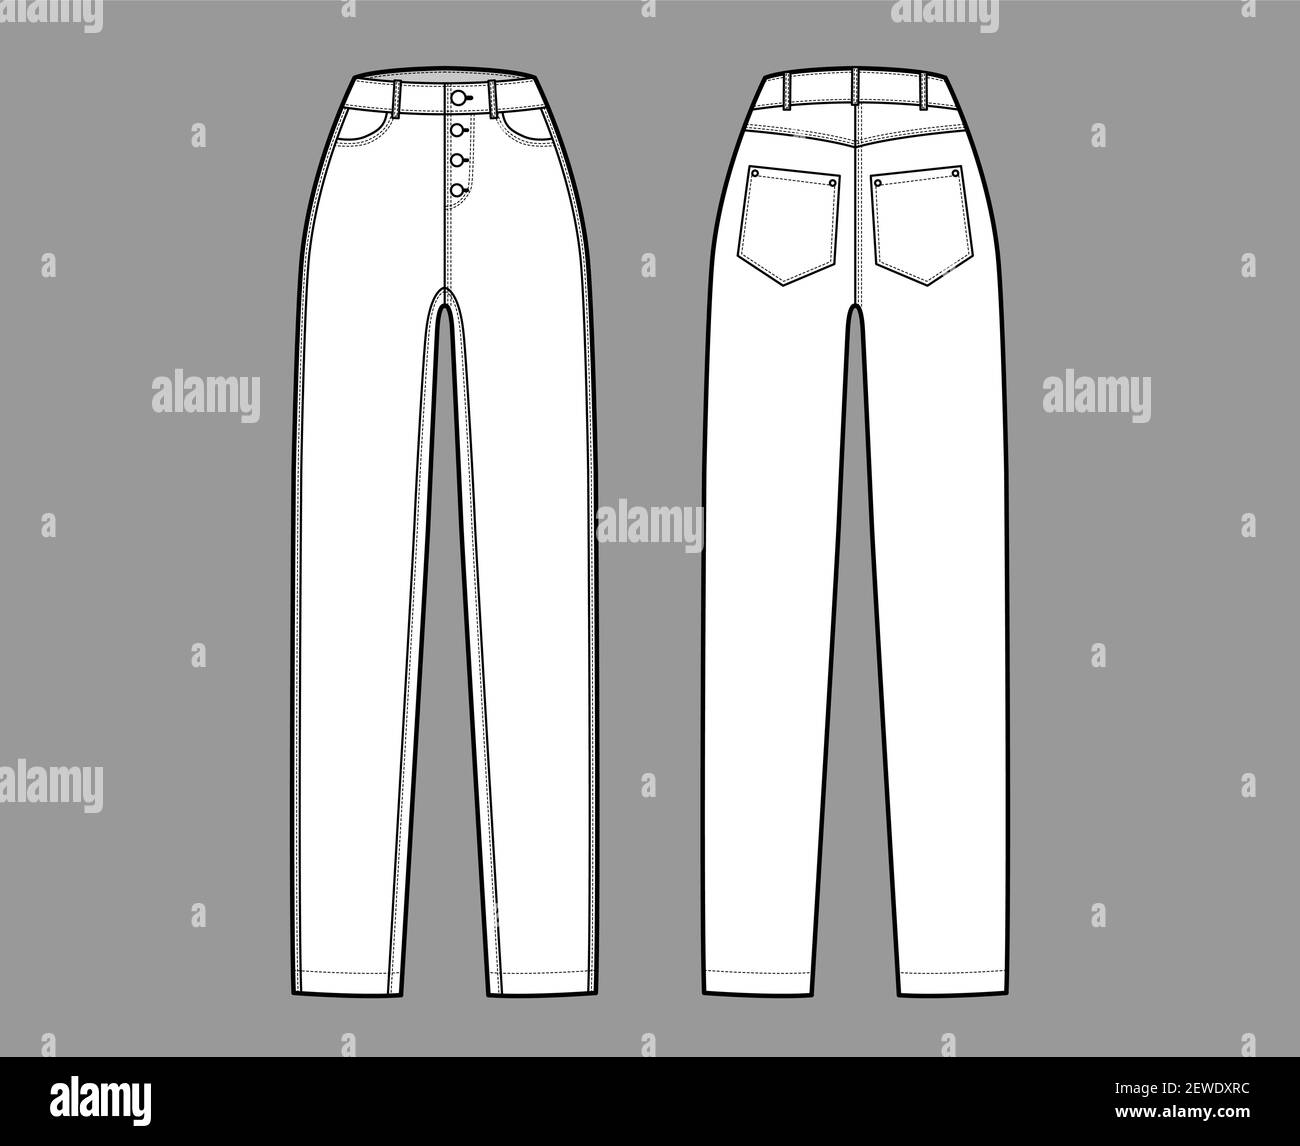 Jeans botton fly tapered Denim pants technical fashion illustration ...